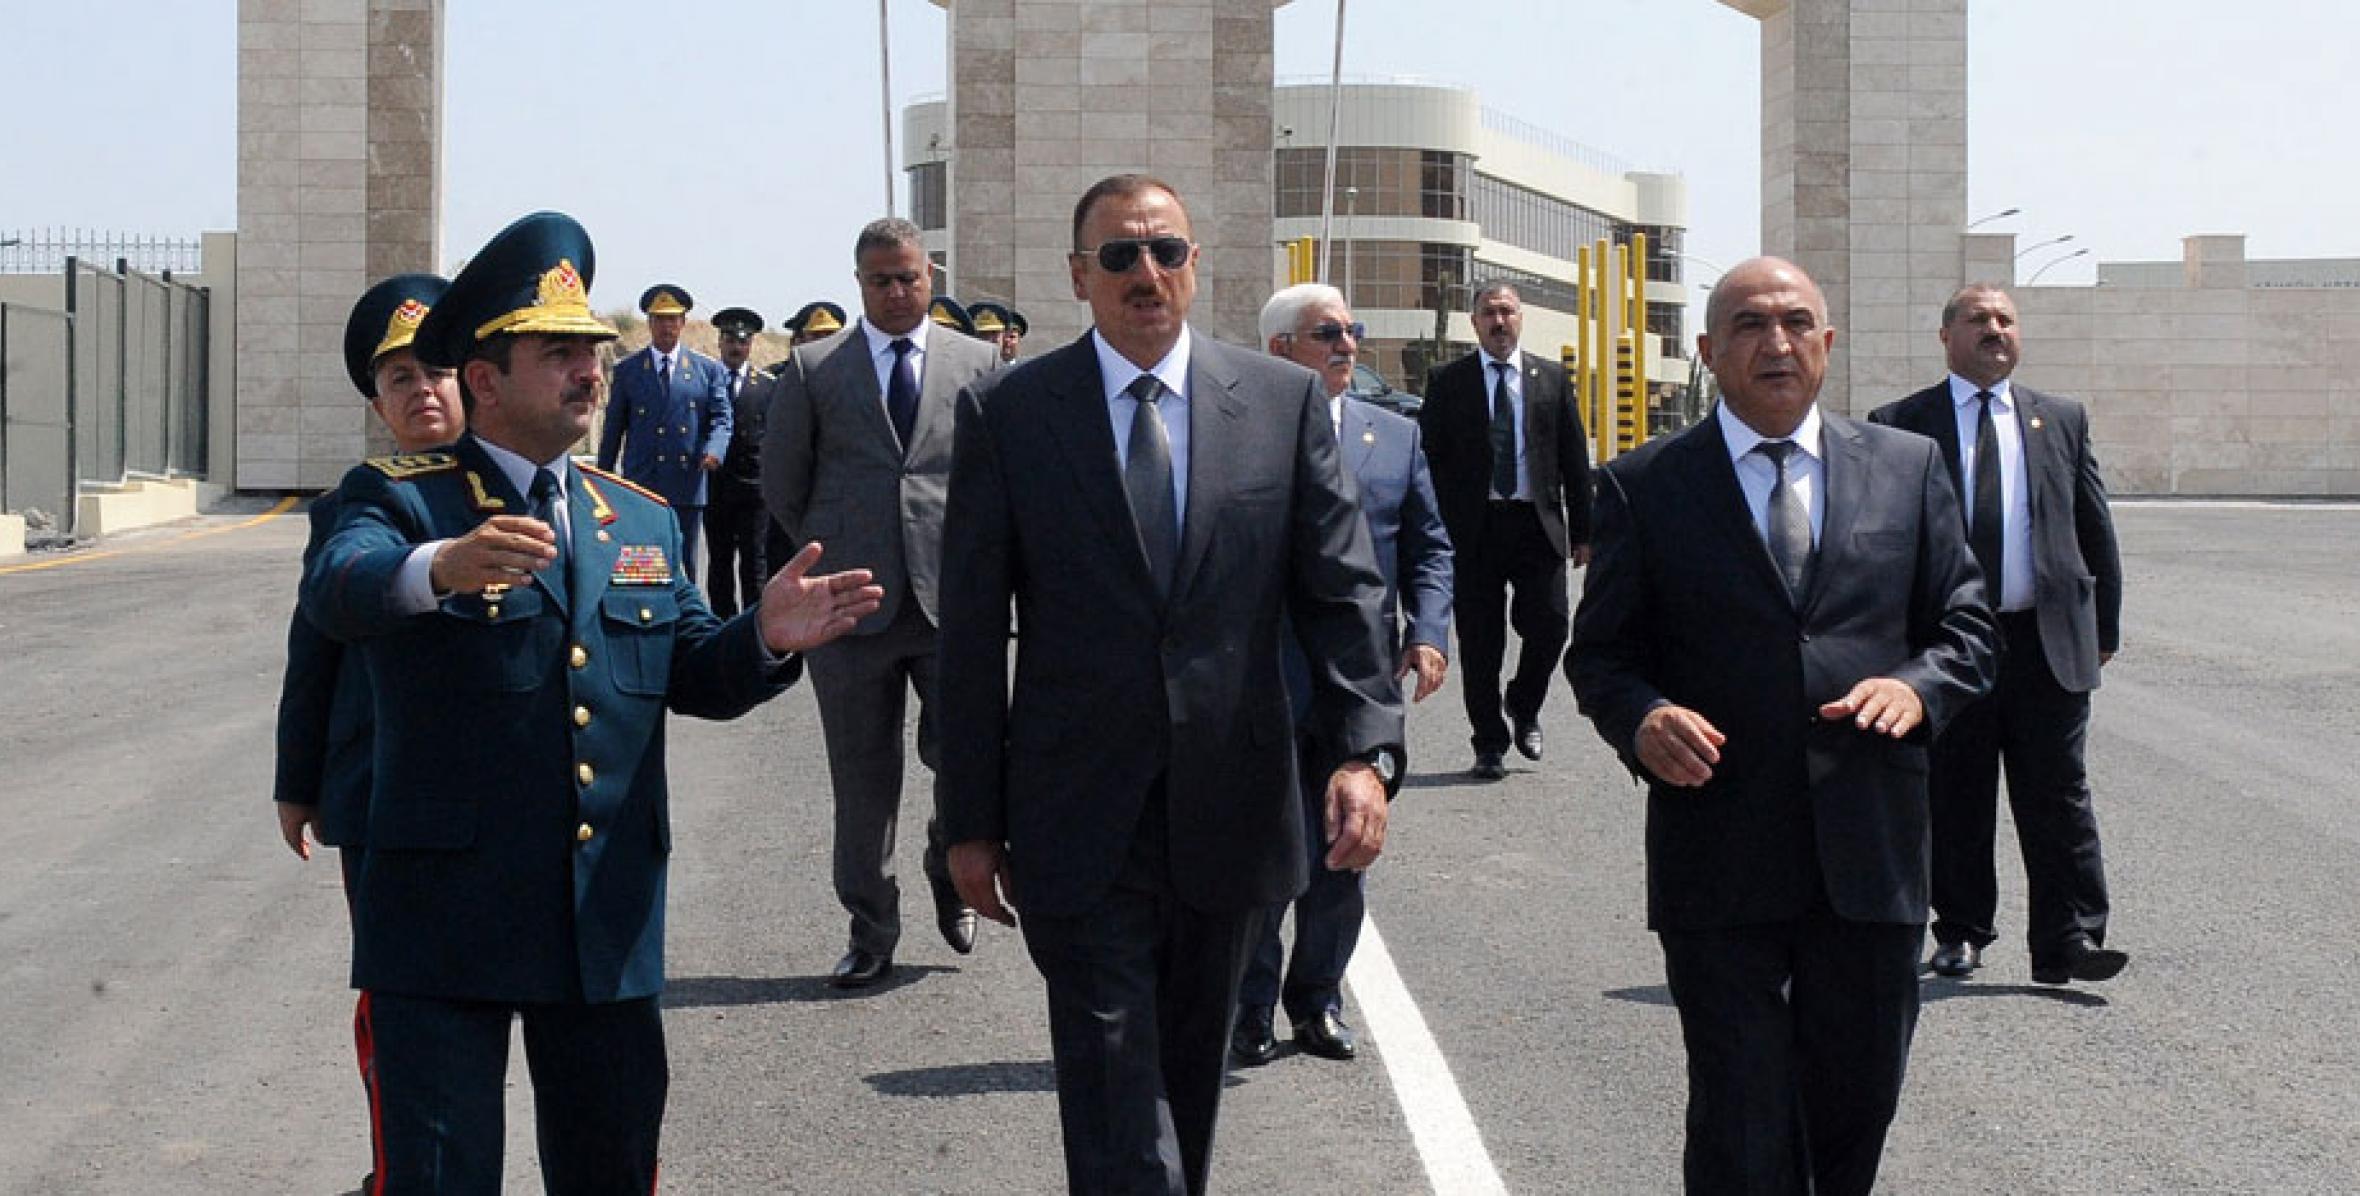 Ilham Aliyev took part in the opening of the Samur Customs Checkpoint